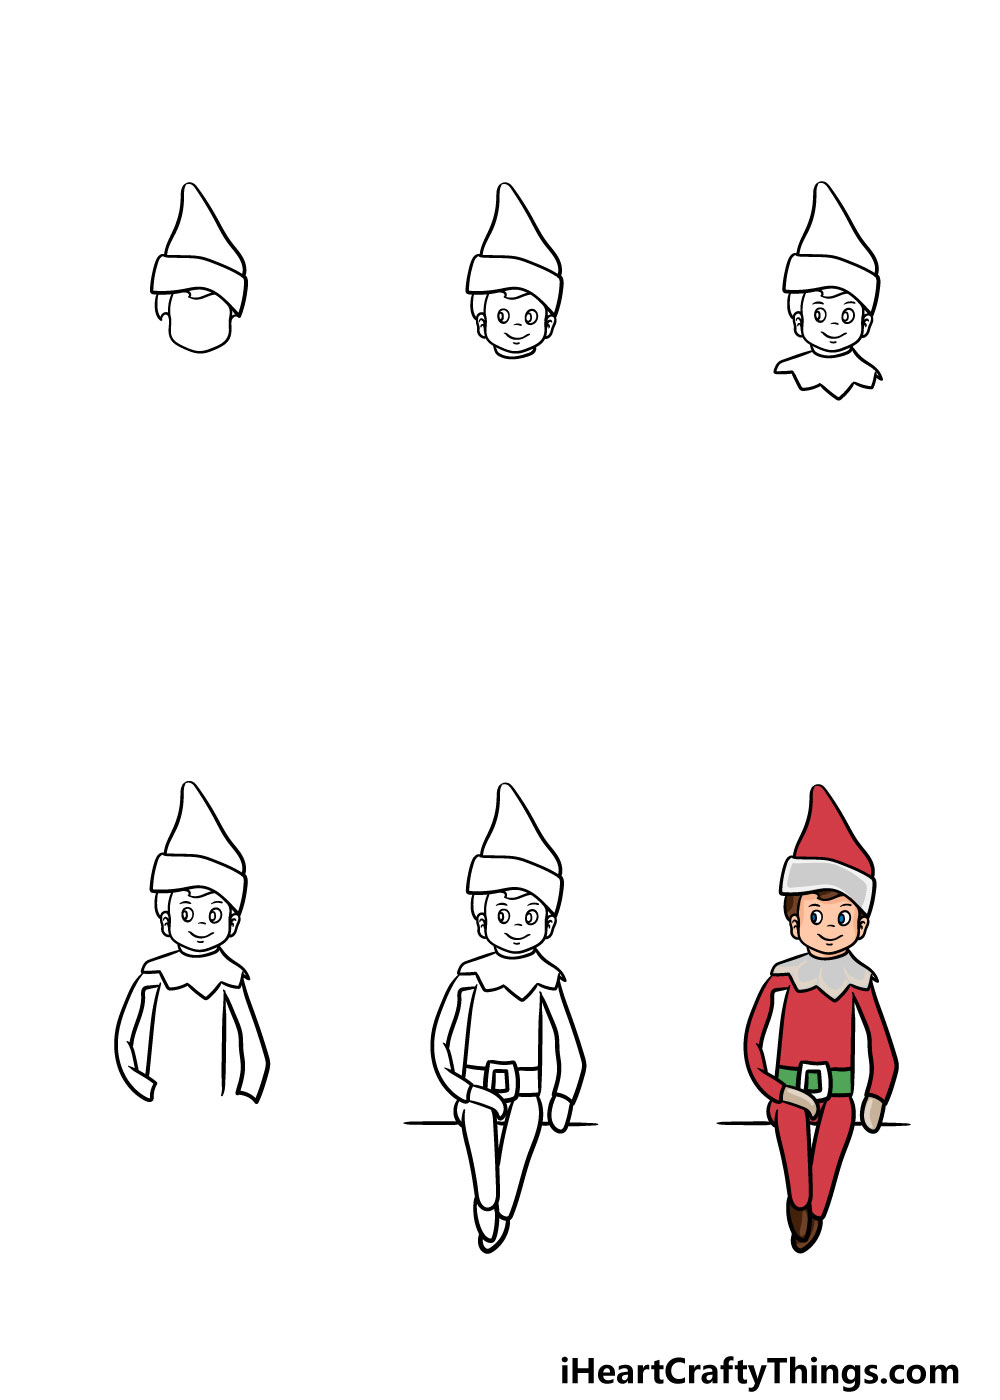 how to draw an elf on a shelf in 6 steps